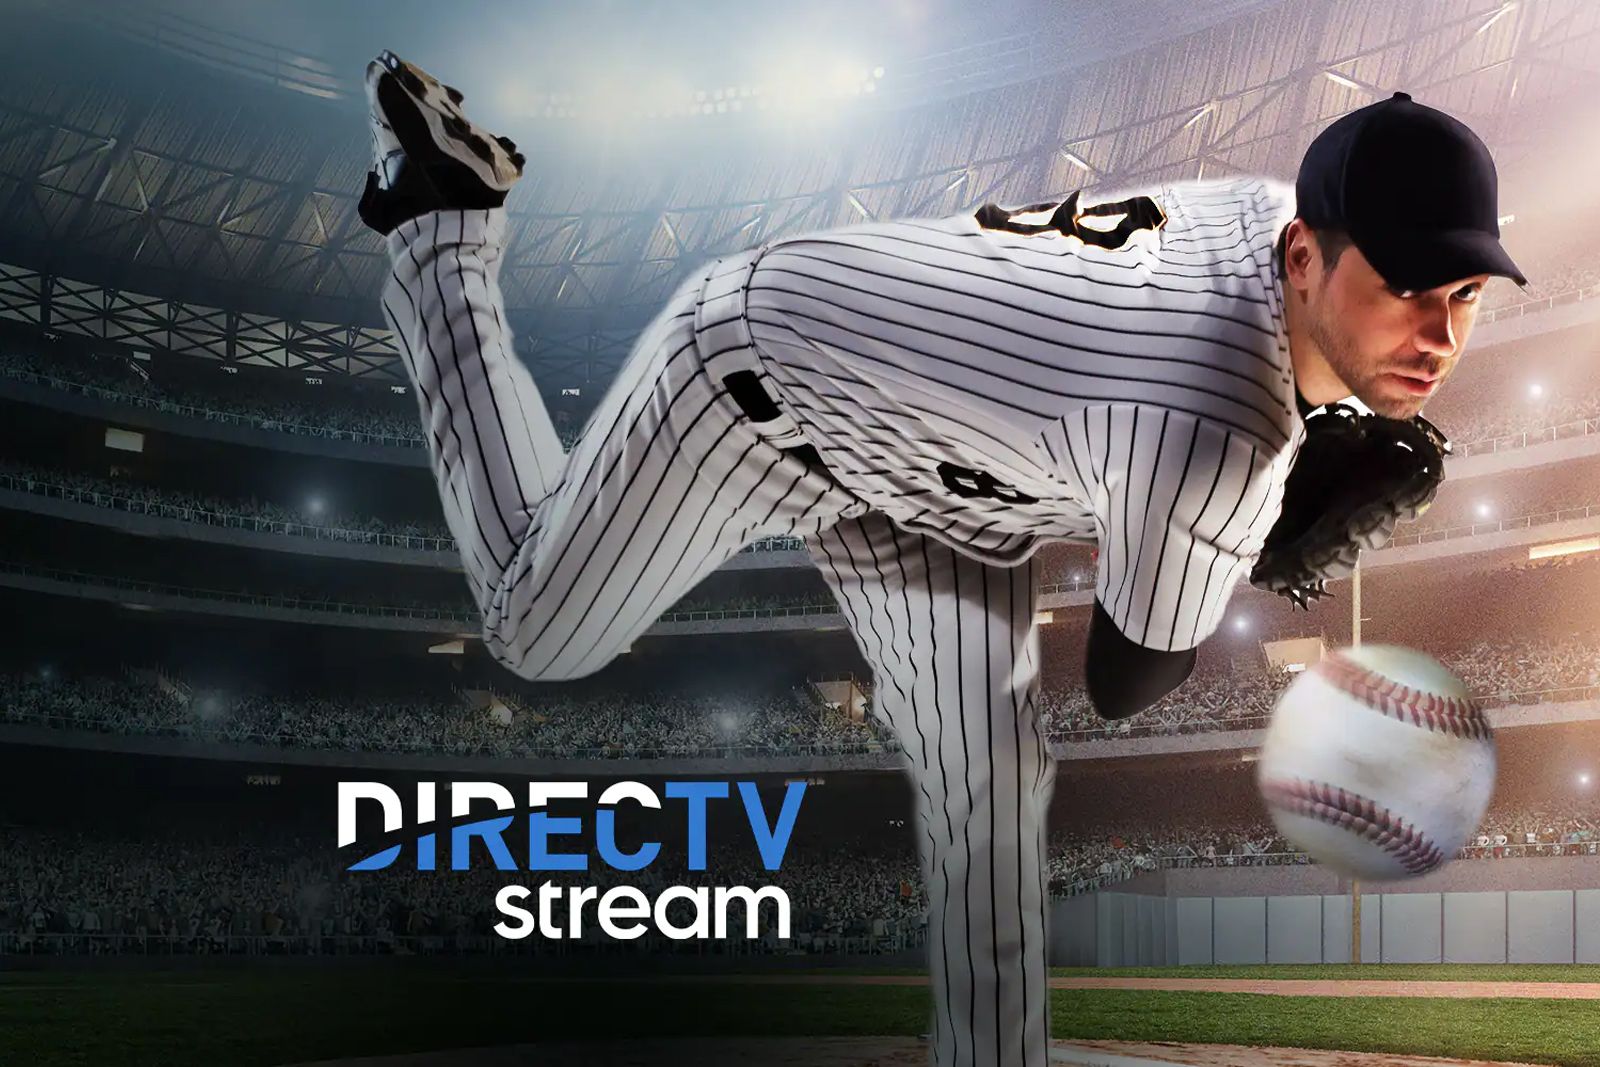 Sign up and stream baseball games with DIRECTV STREAM!